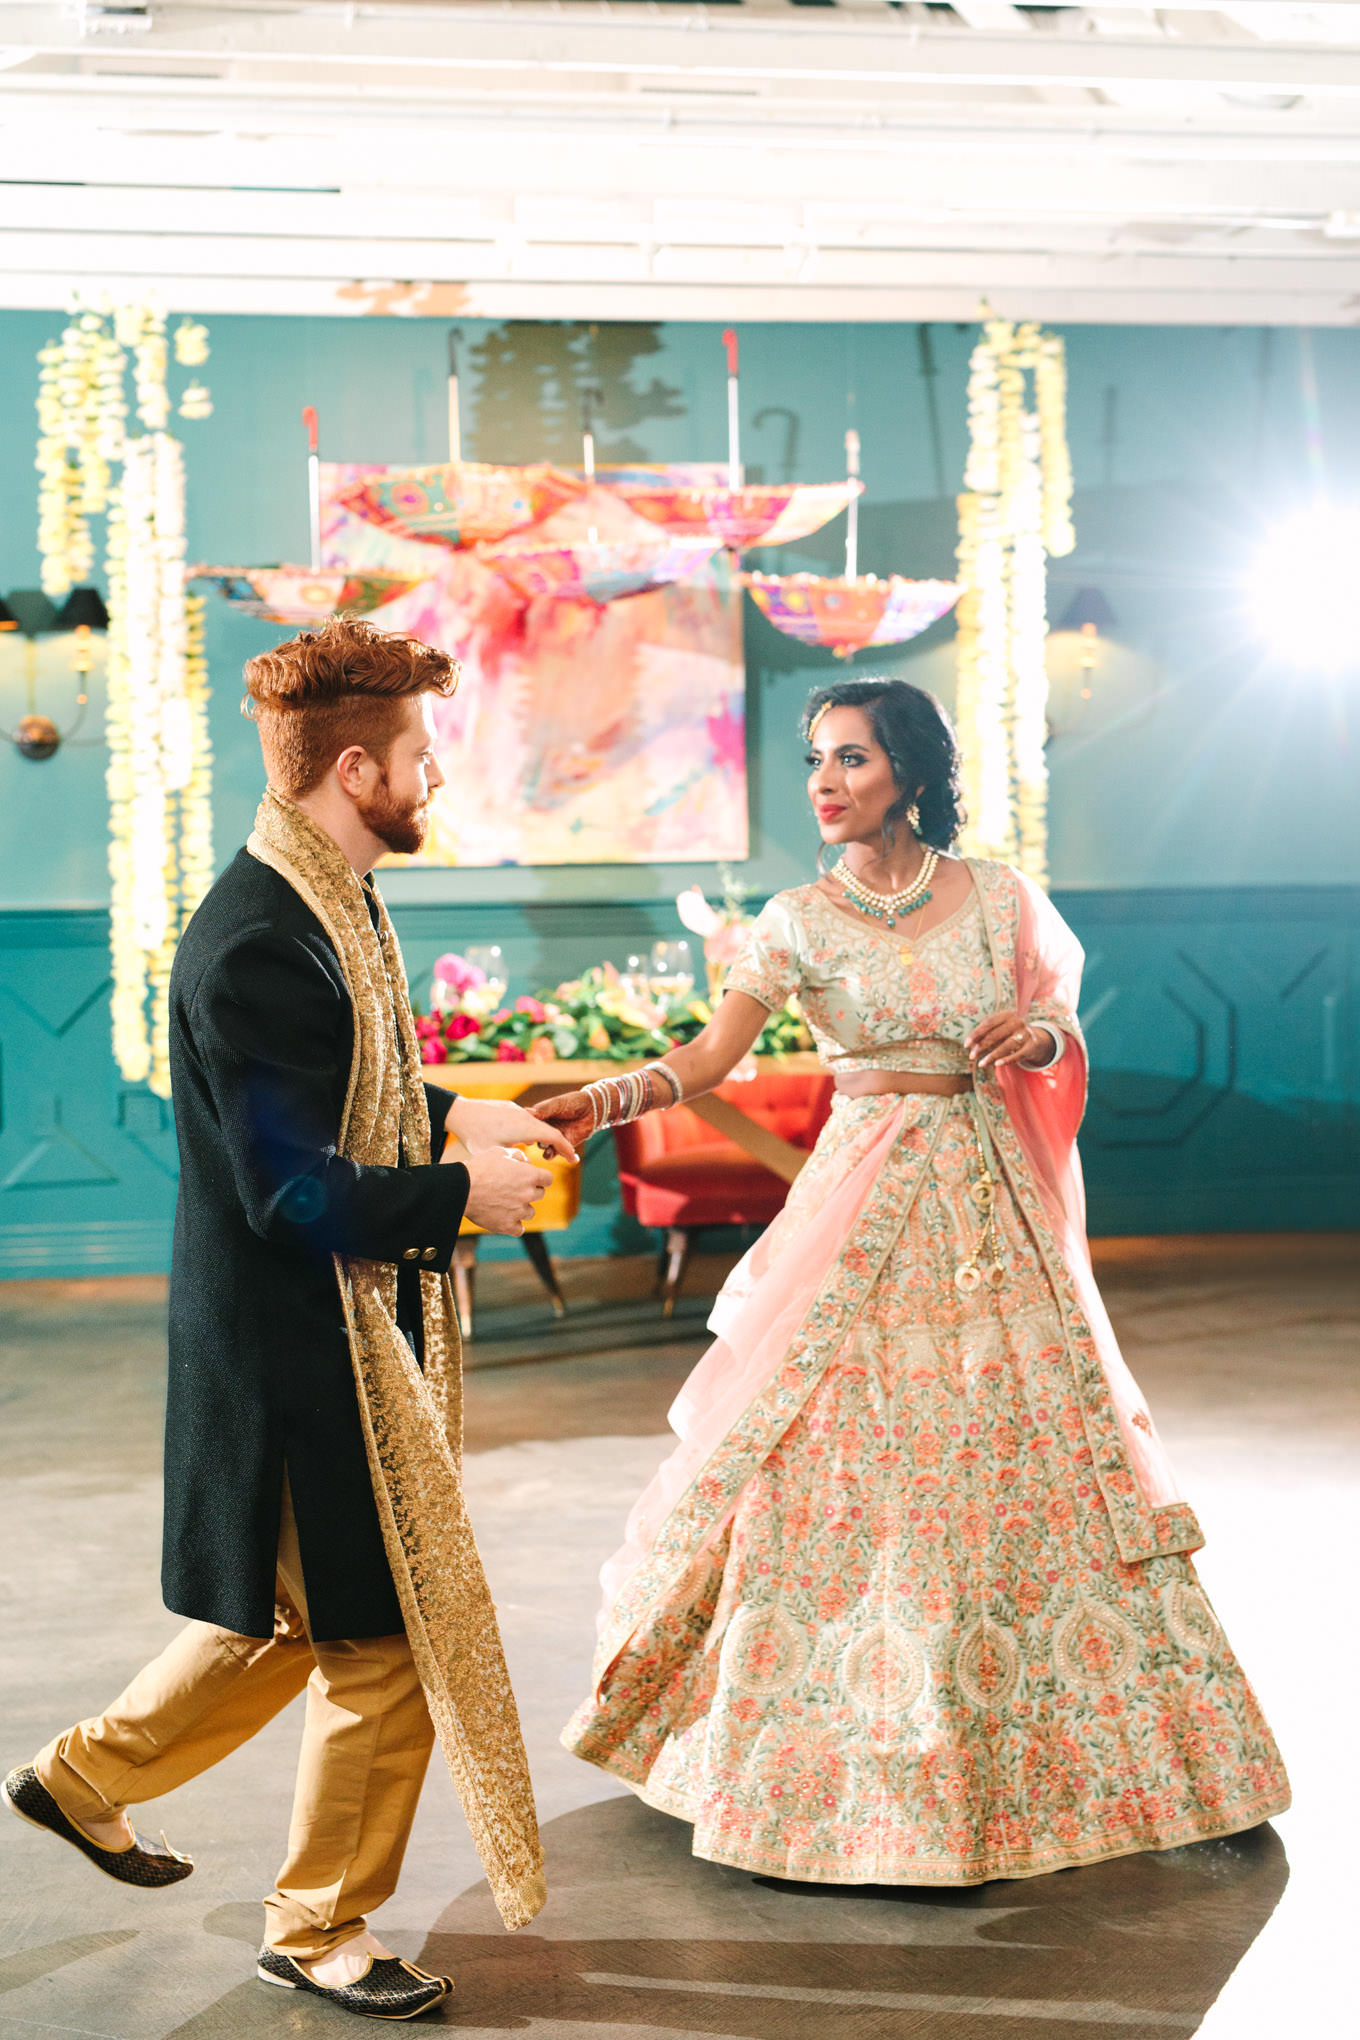 Groom and bride's first dance. Two Disney artists create a unique and colorful Indian Fusion wedding at The Fig House Los Angeles, featured on Green Wedding Shoes. | Colorful and elevated wedding inspiration for fun-loving couples in Southern California | #indianwedding #indianfusionwedding #thefighouse #losangeleswedding   Source: Mary Costa Photography | Los Angeles